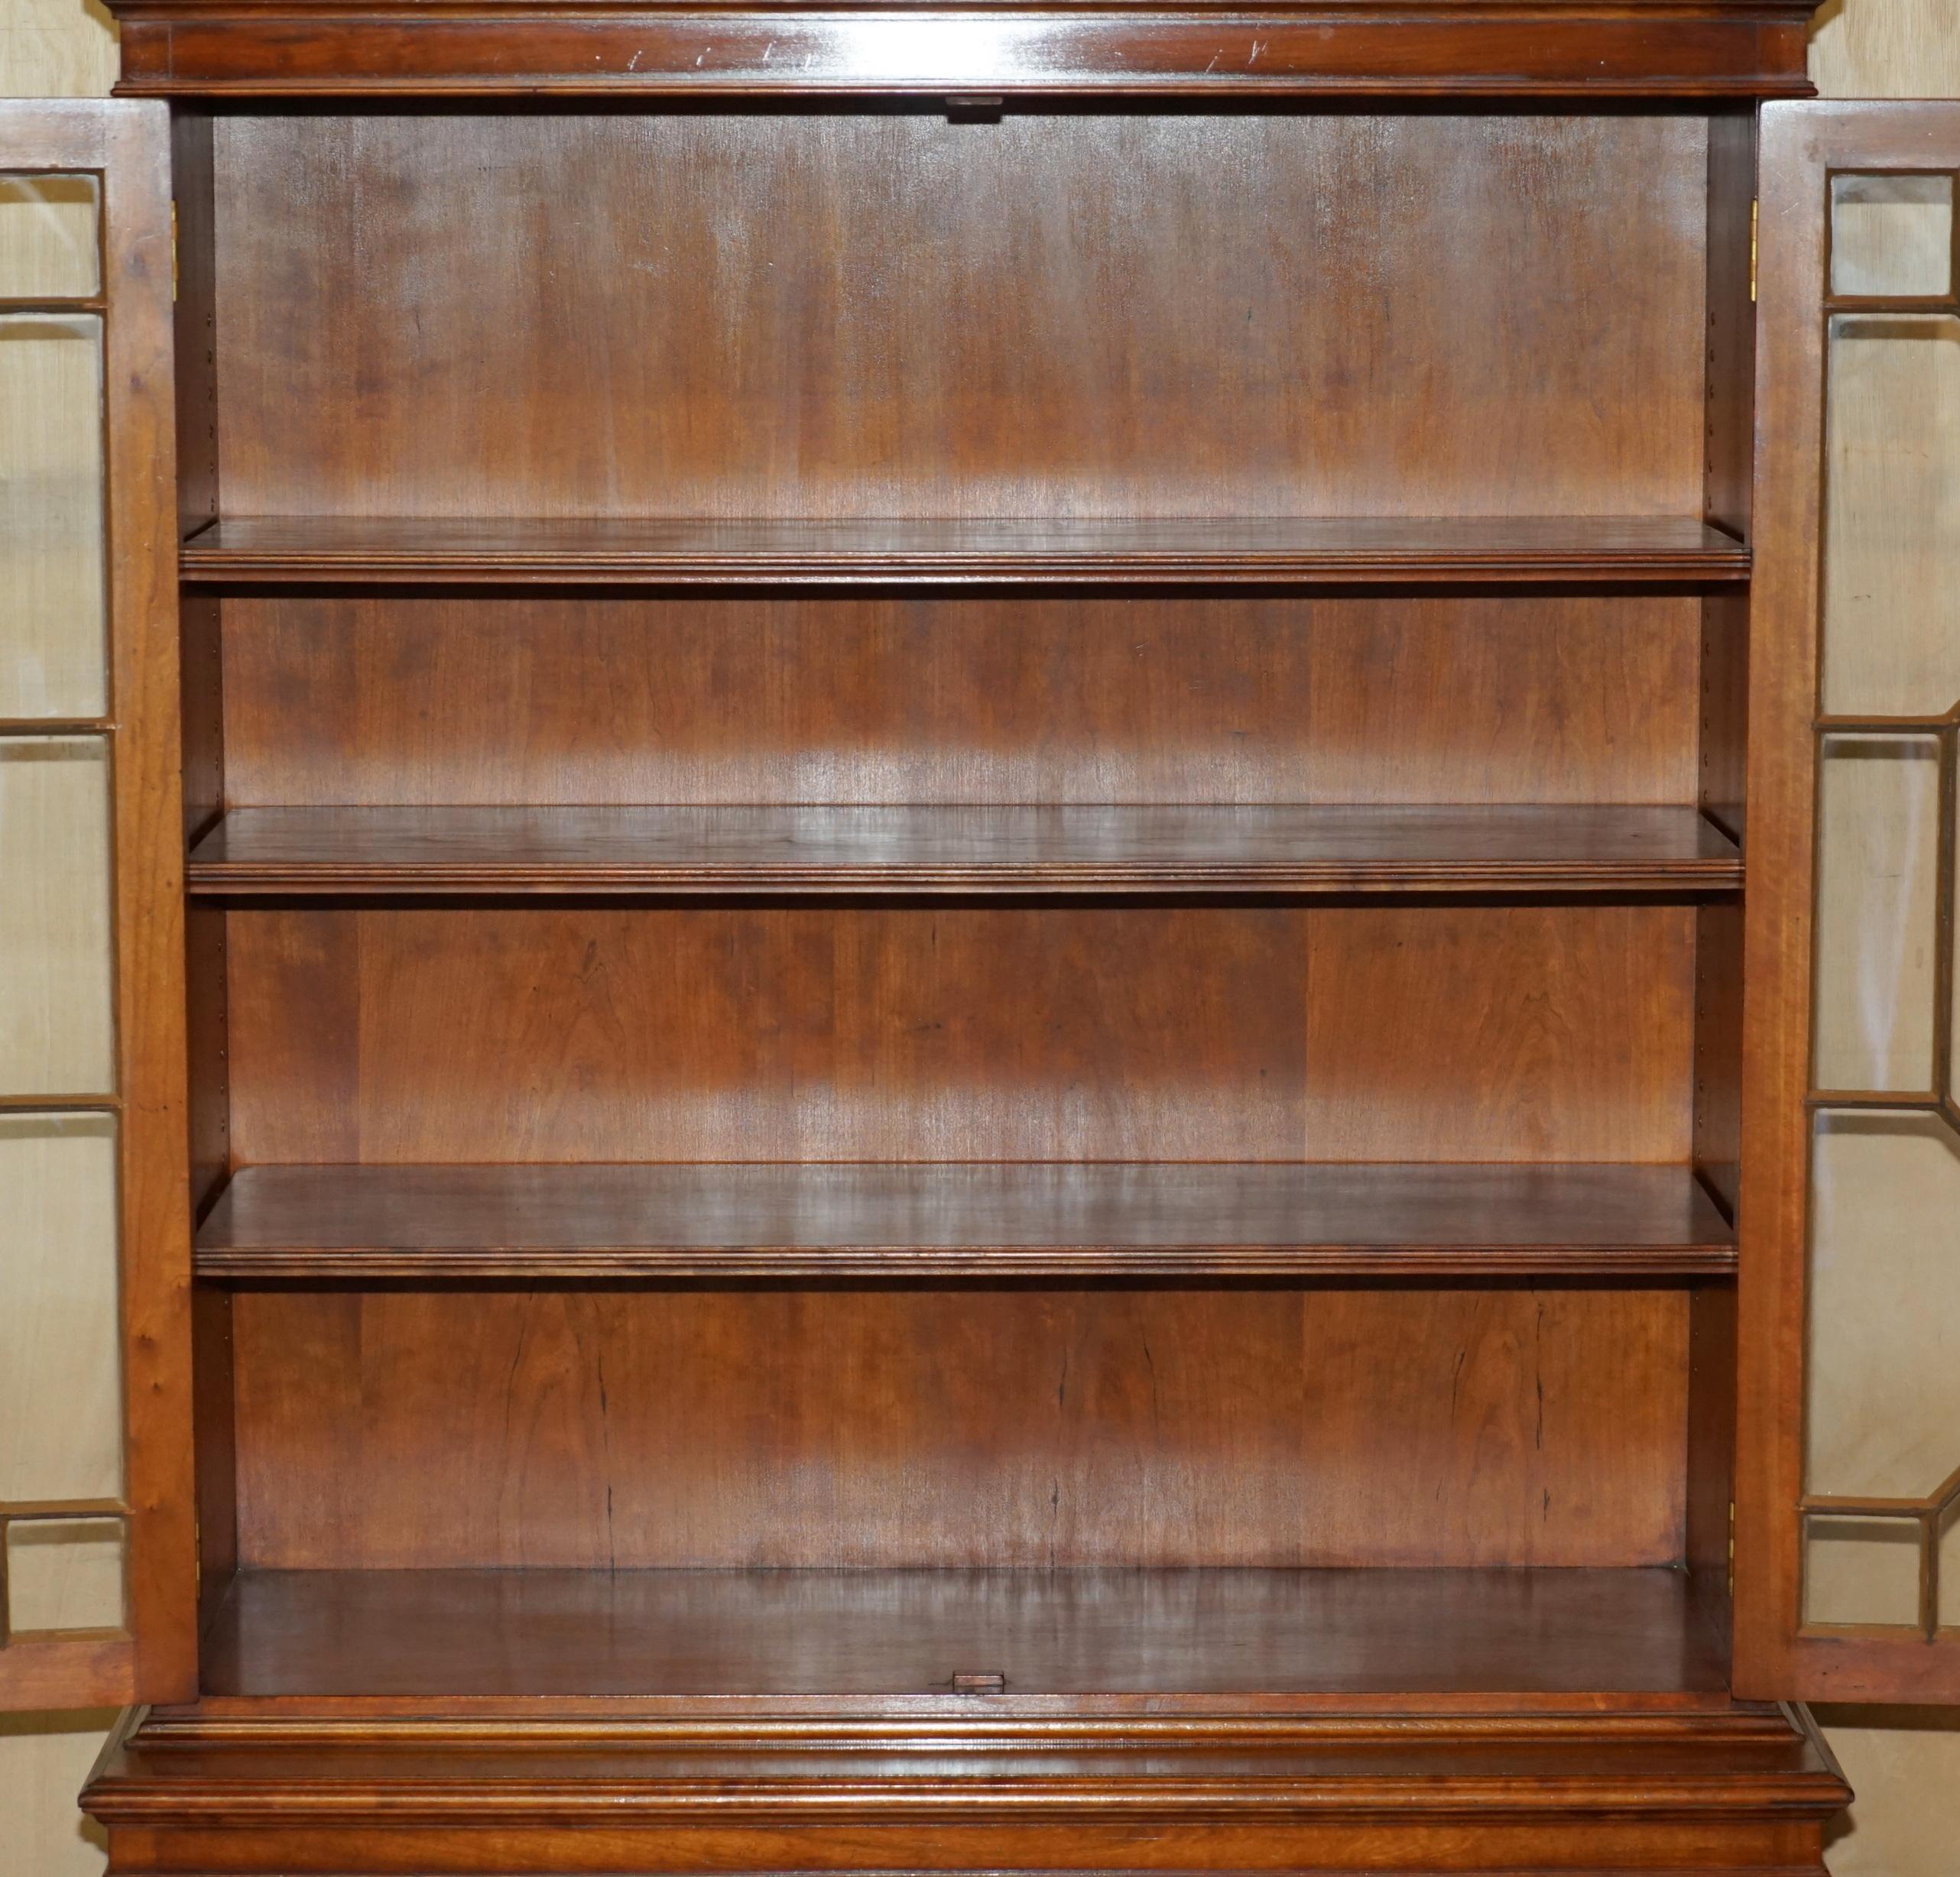 HARRODS LONDON REH KENNEDY ASTRAL GLAZED LiBRARY BOOKCASE CUPBOARD STORAGE UNIT For Sale 10